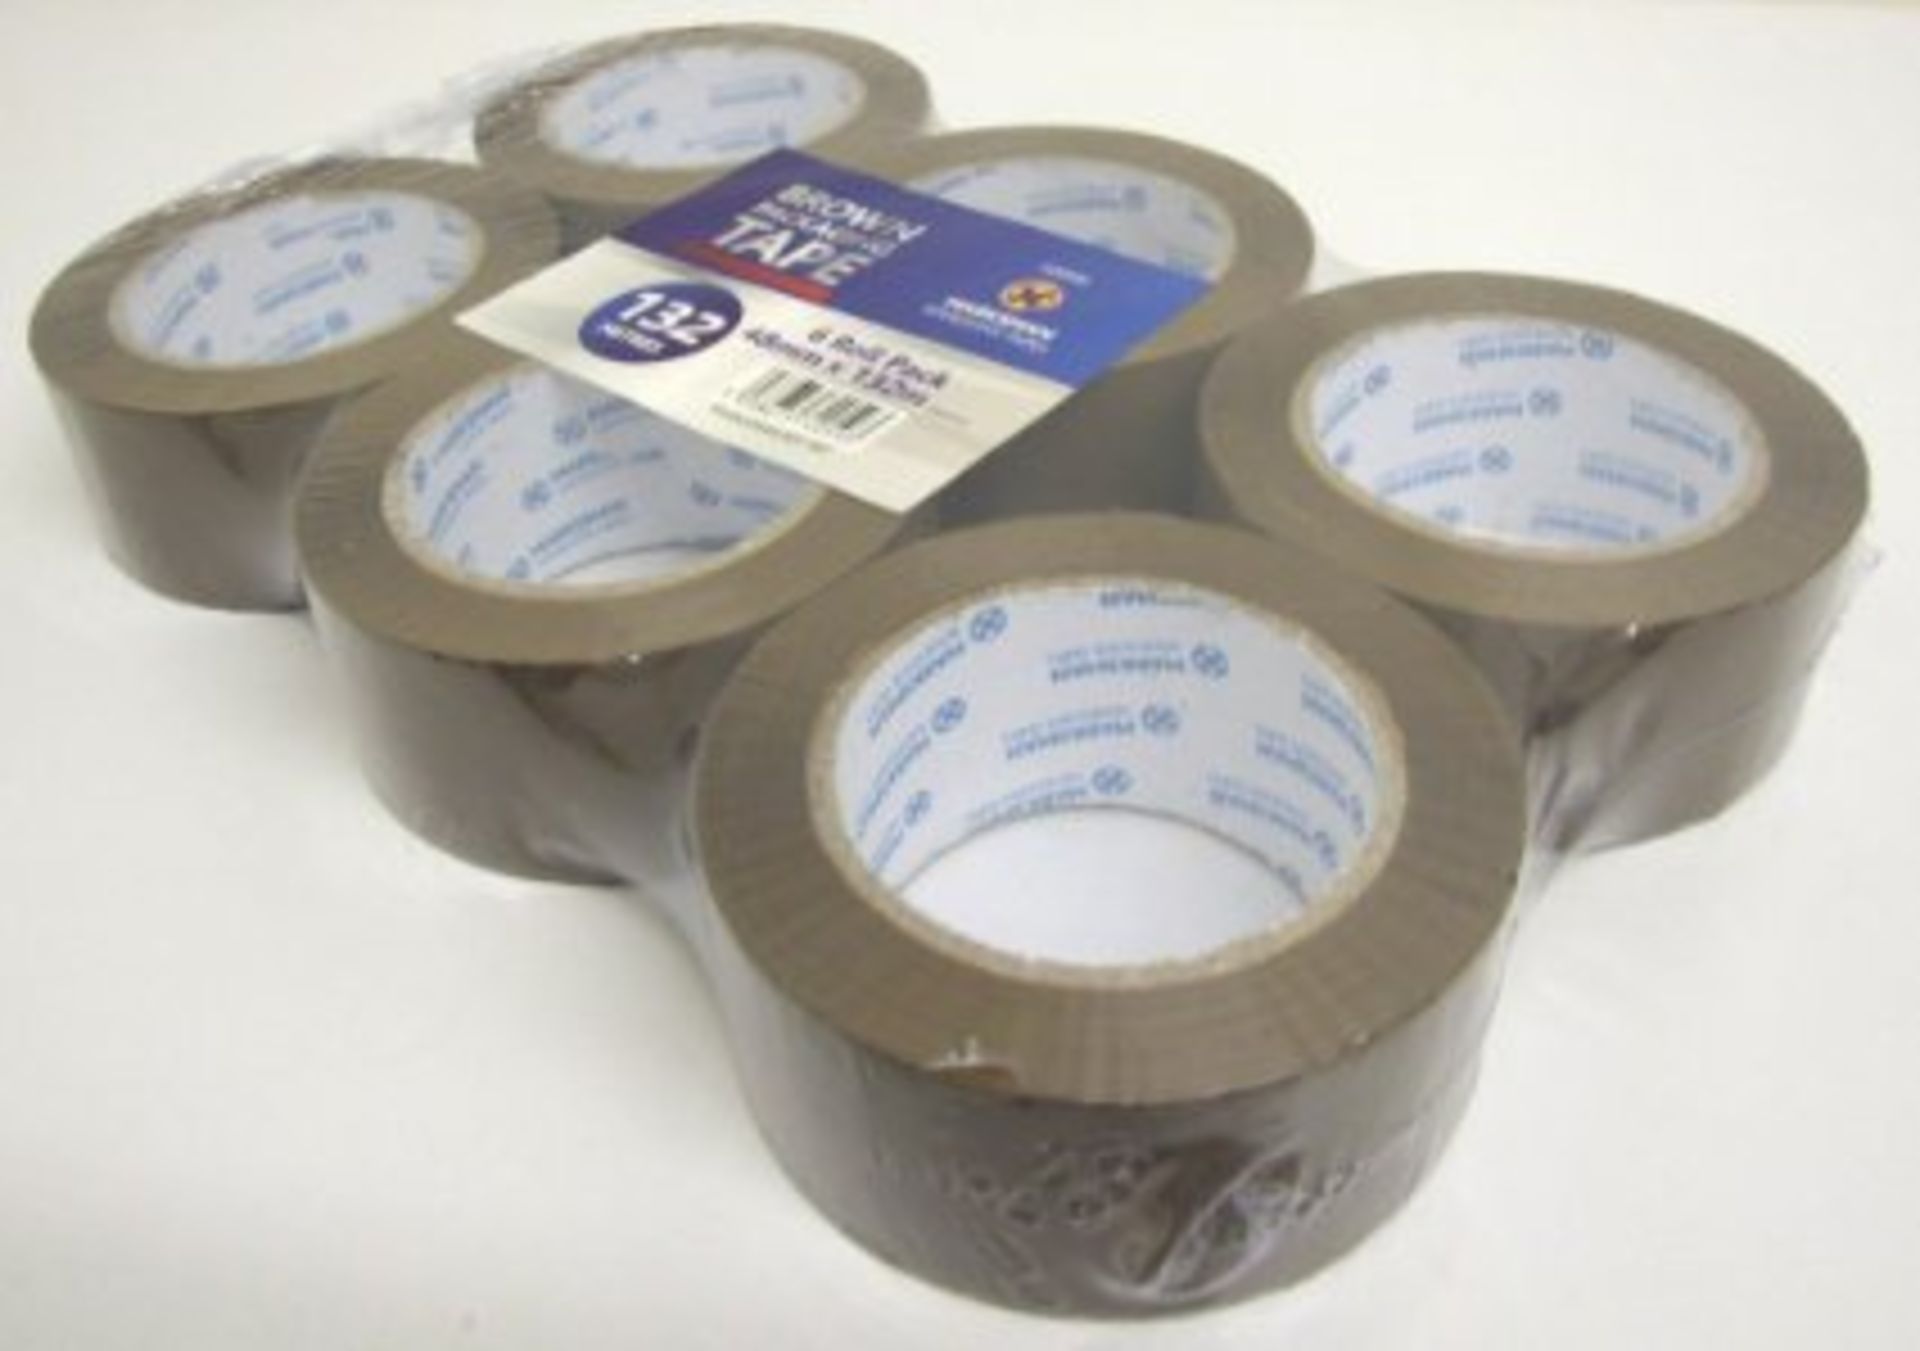 V Brand New 6 Roll Pack Brown Packing Tape 132 Metres total 48mm width X 2 YOUR BID PRICE TO BE